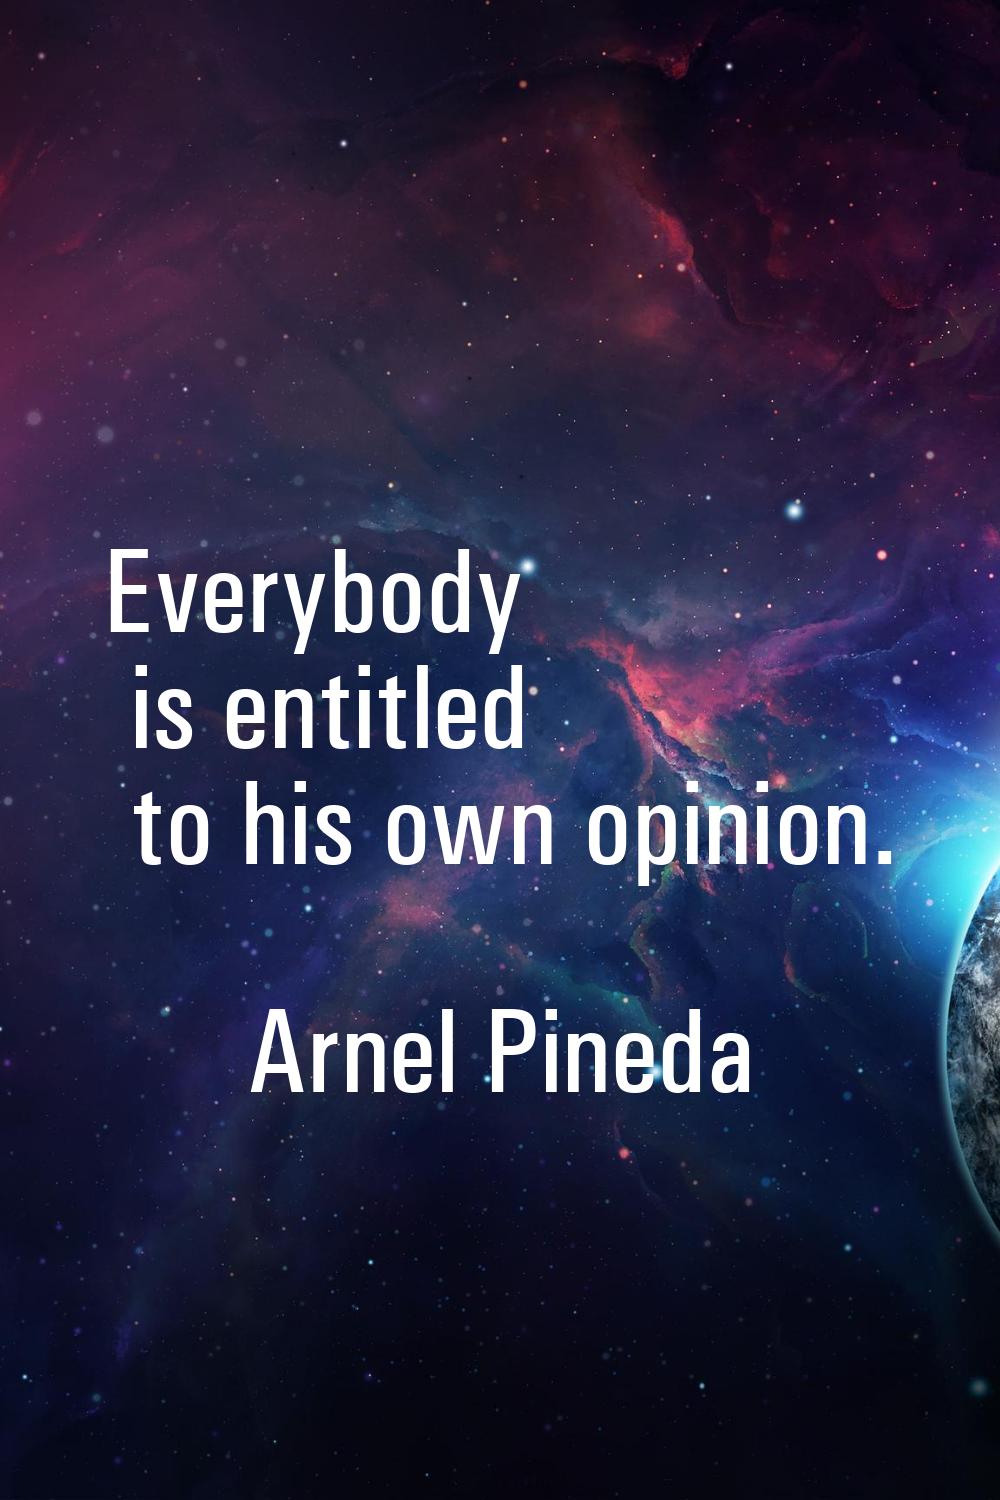 Everybody is entitled to his own opinion.